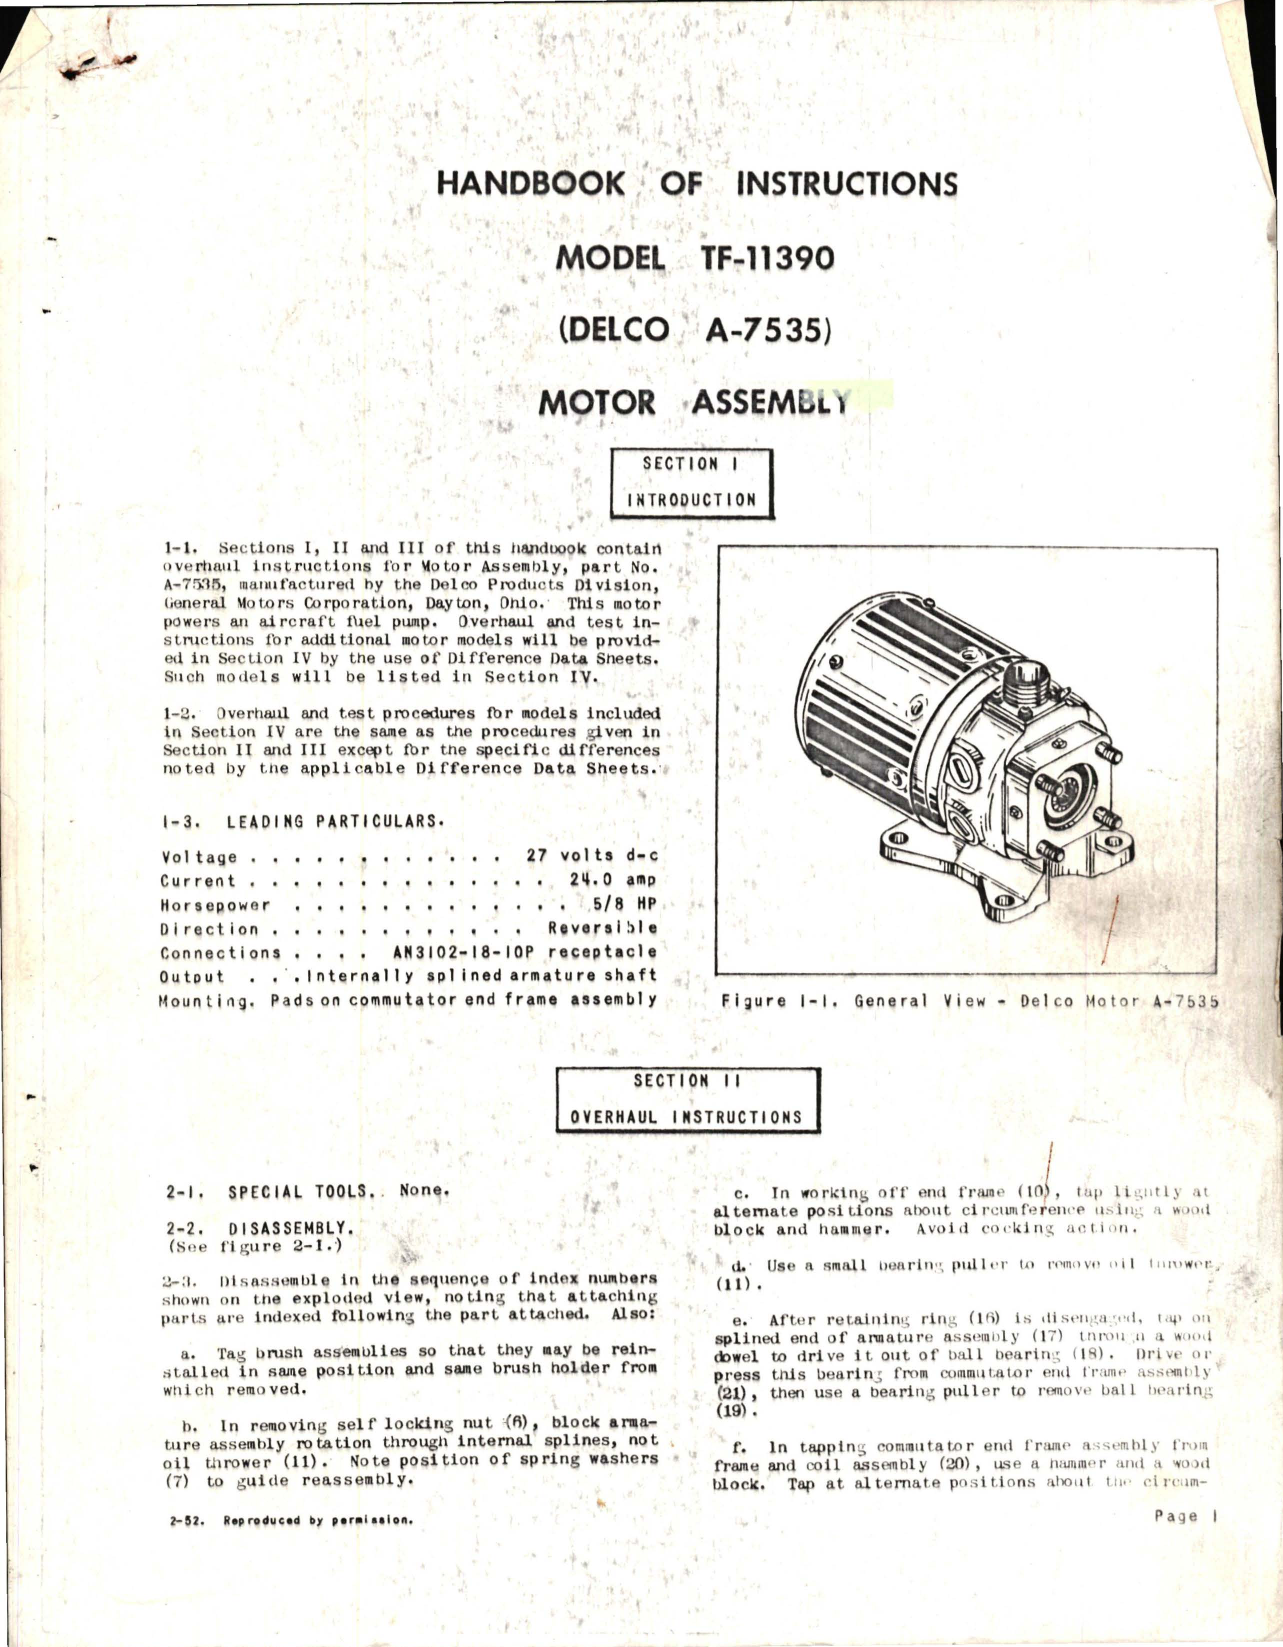 Sample page 1 from AirCorps Library document: Handbook of Instructions for Model TF-11390 Motor Assembly - Delco A-7535